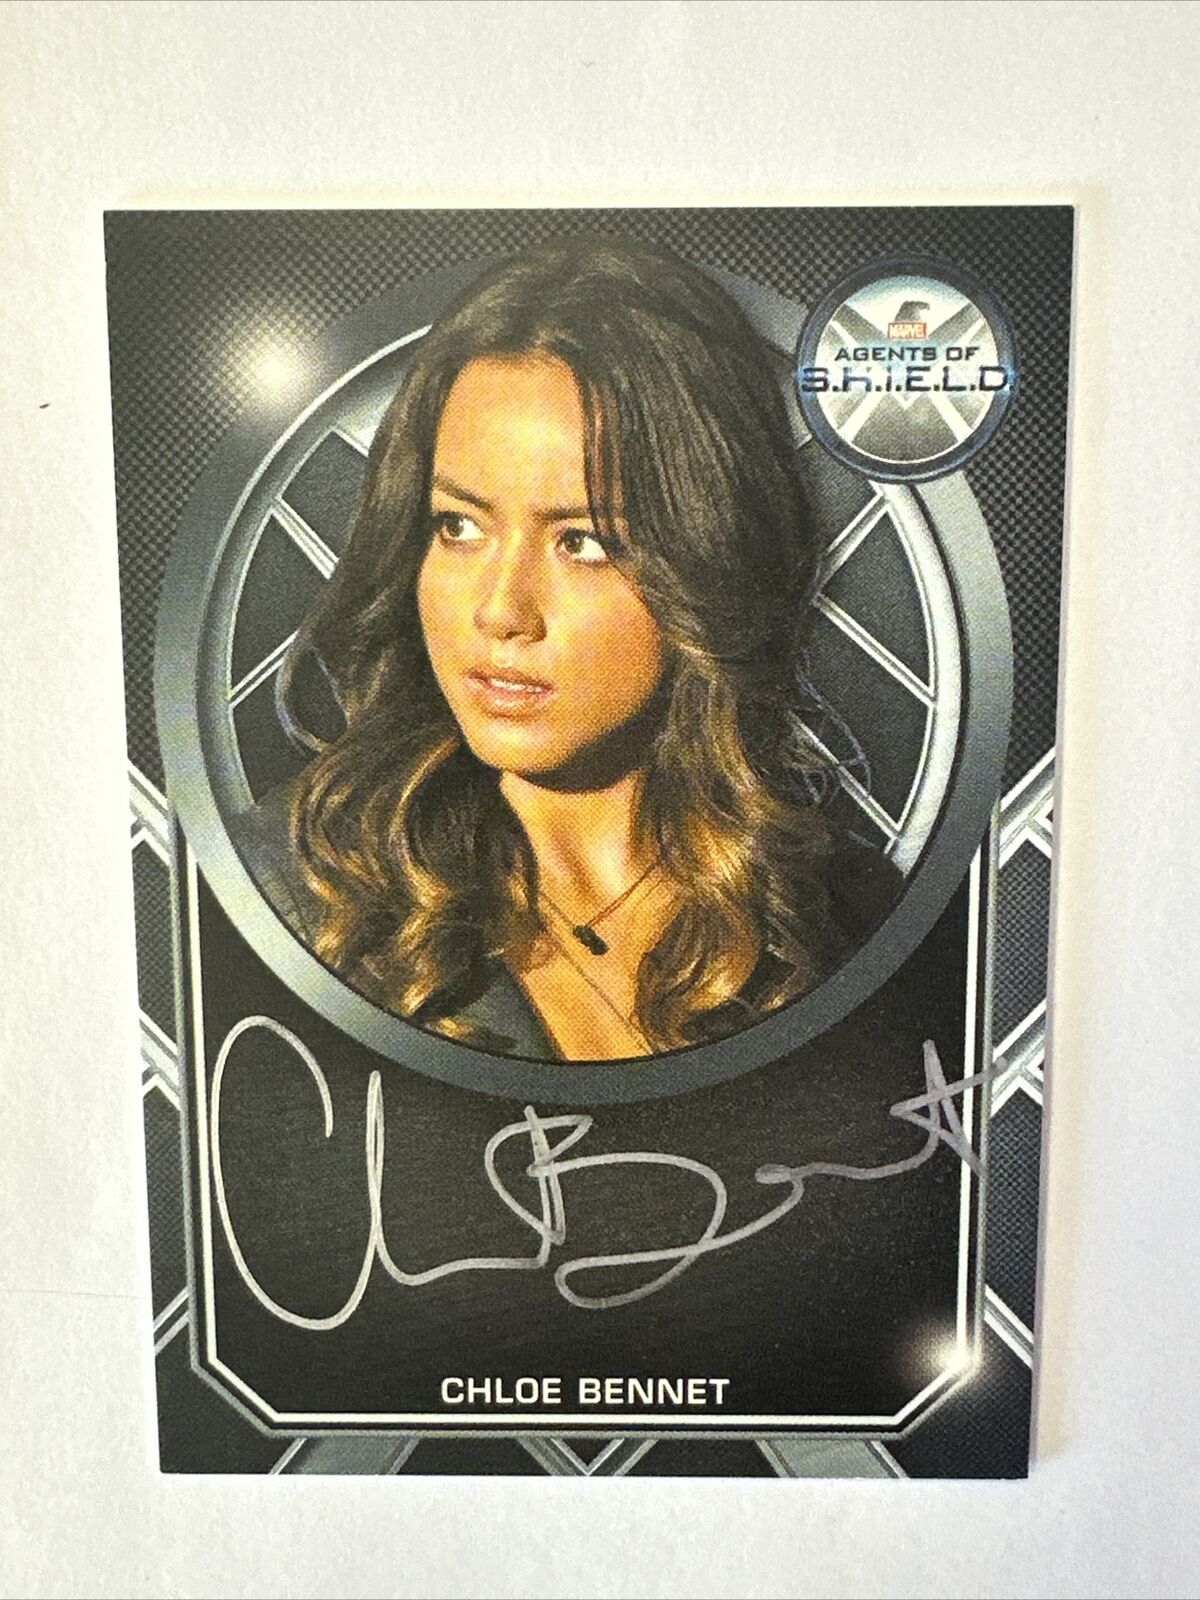 MARVEL: AGENTS OF SHIELD SEASON 2 CHLOE BENNET SKYE EXCLSV AUTOGRAPH SIGNED CARD